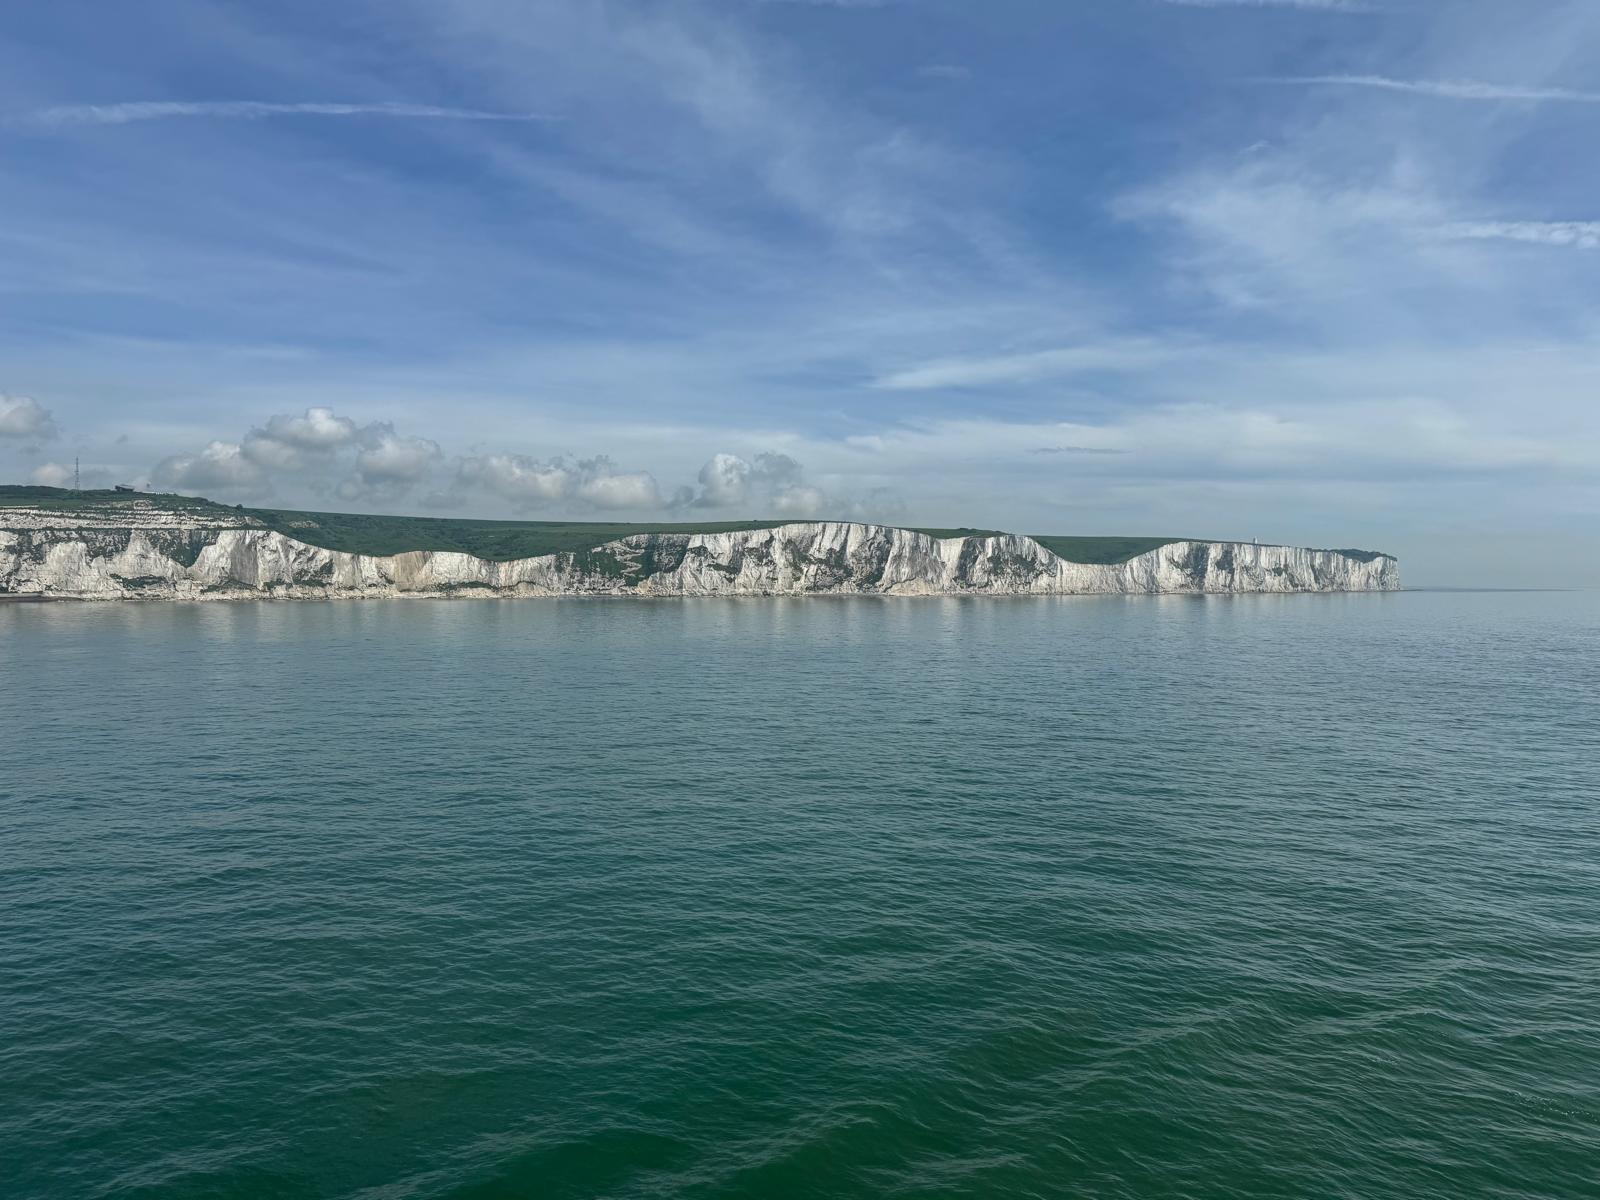 White cliffs of Dover. England here we come.